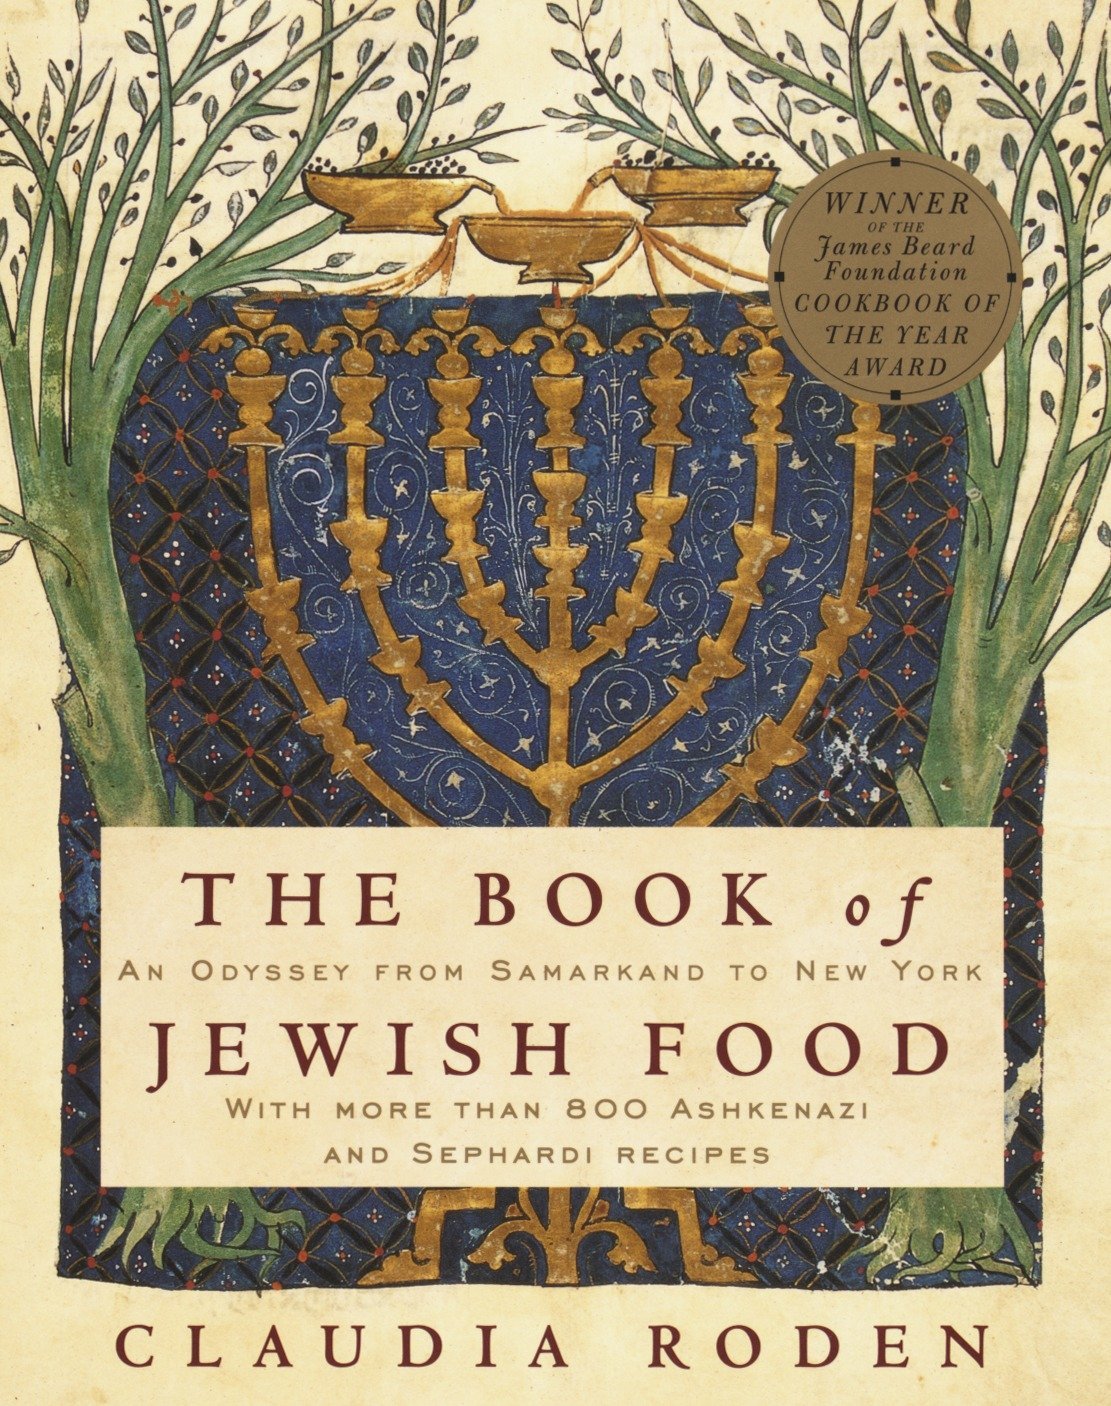 The Book of Jewish Food: An Odyssey from Samarkand to New York (Claudia Roden) *Signed*